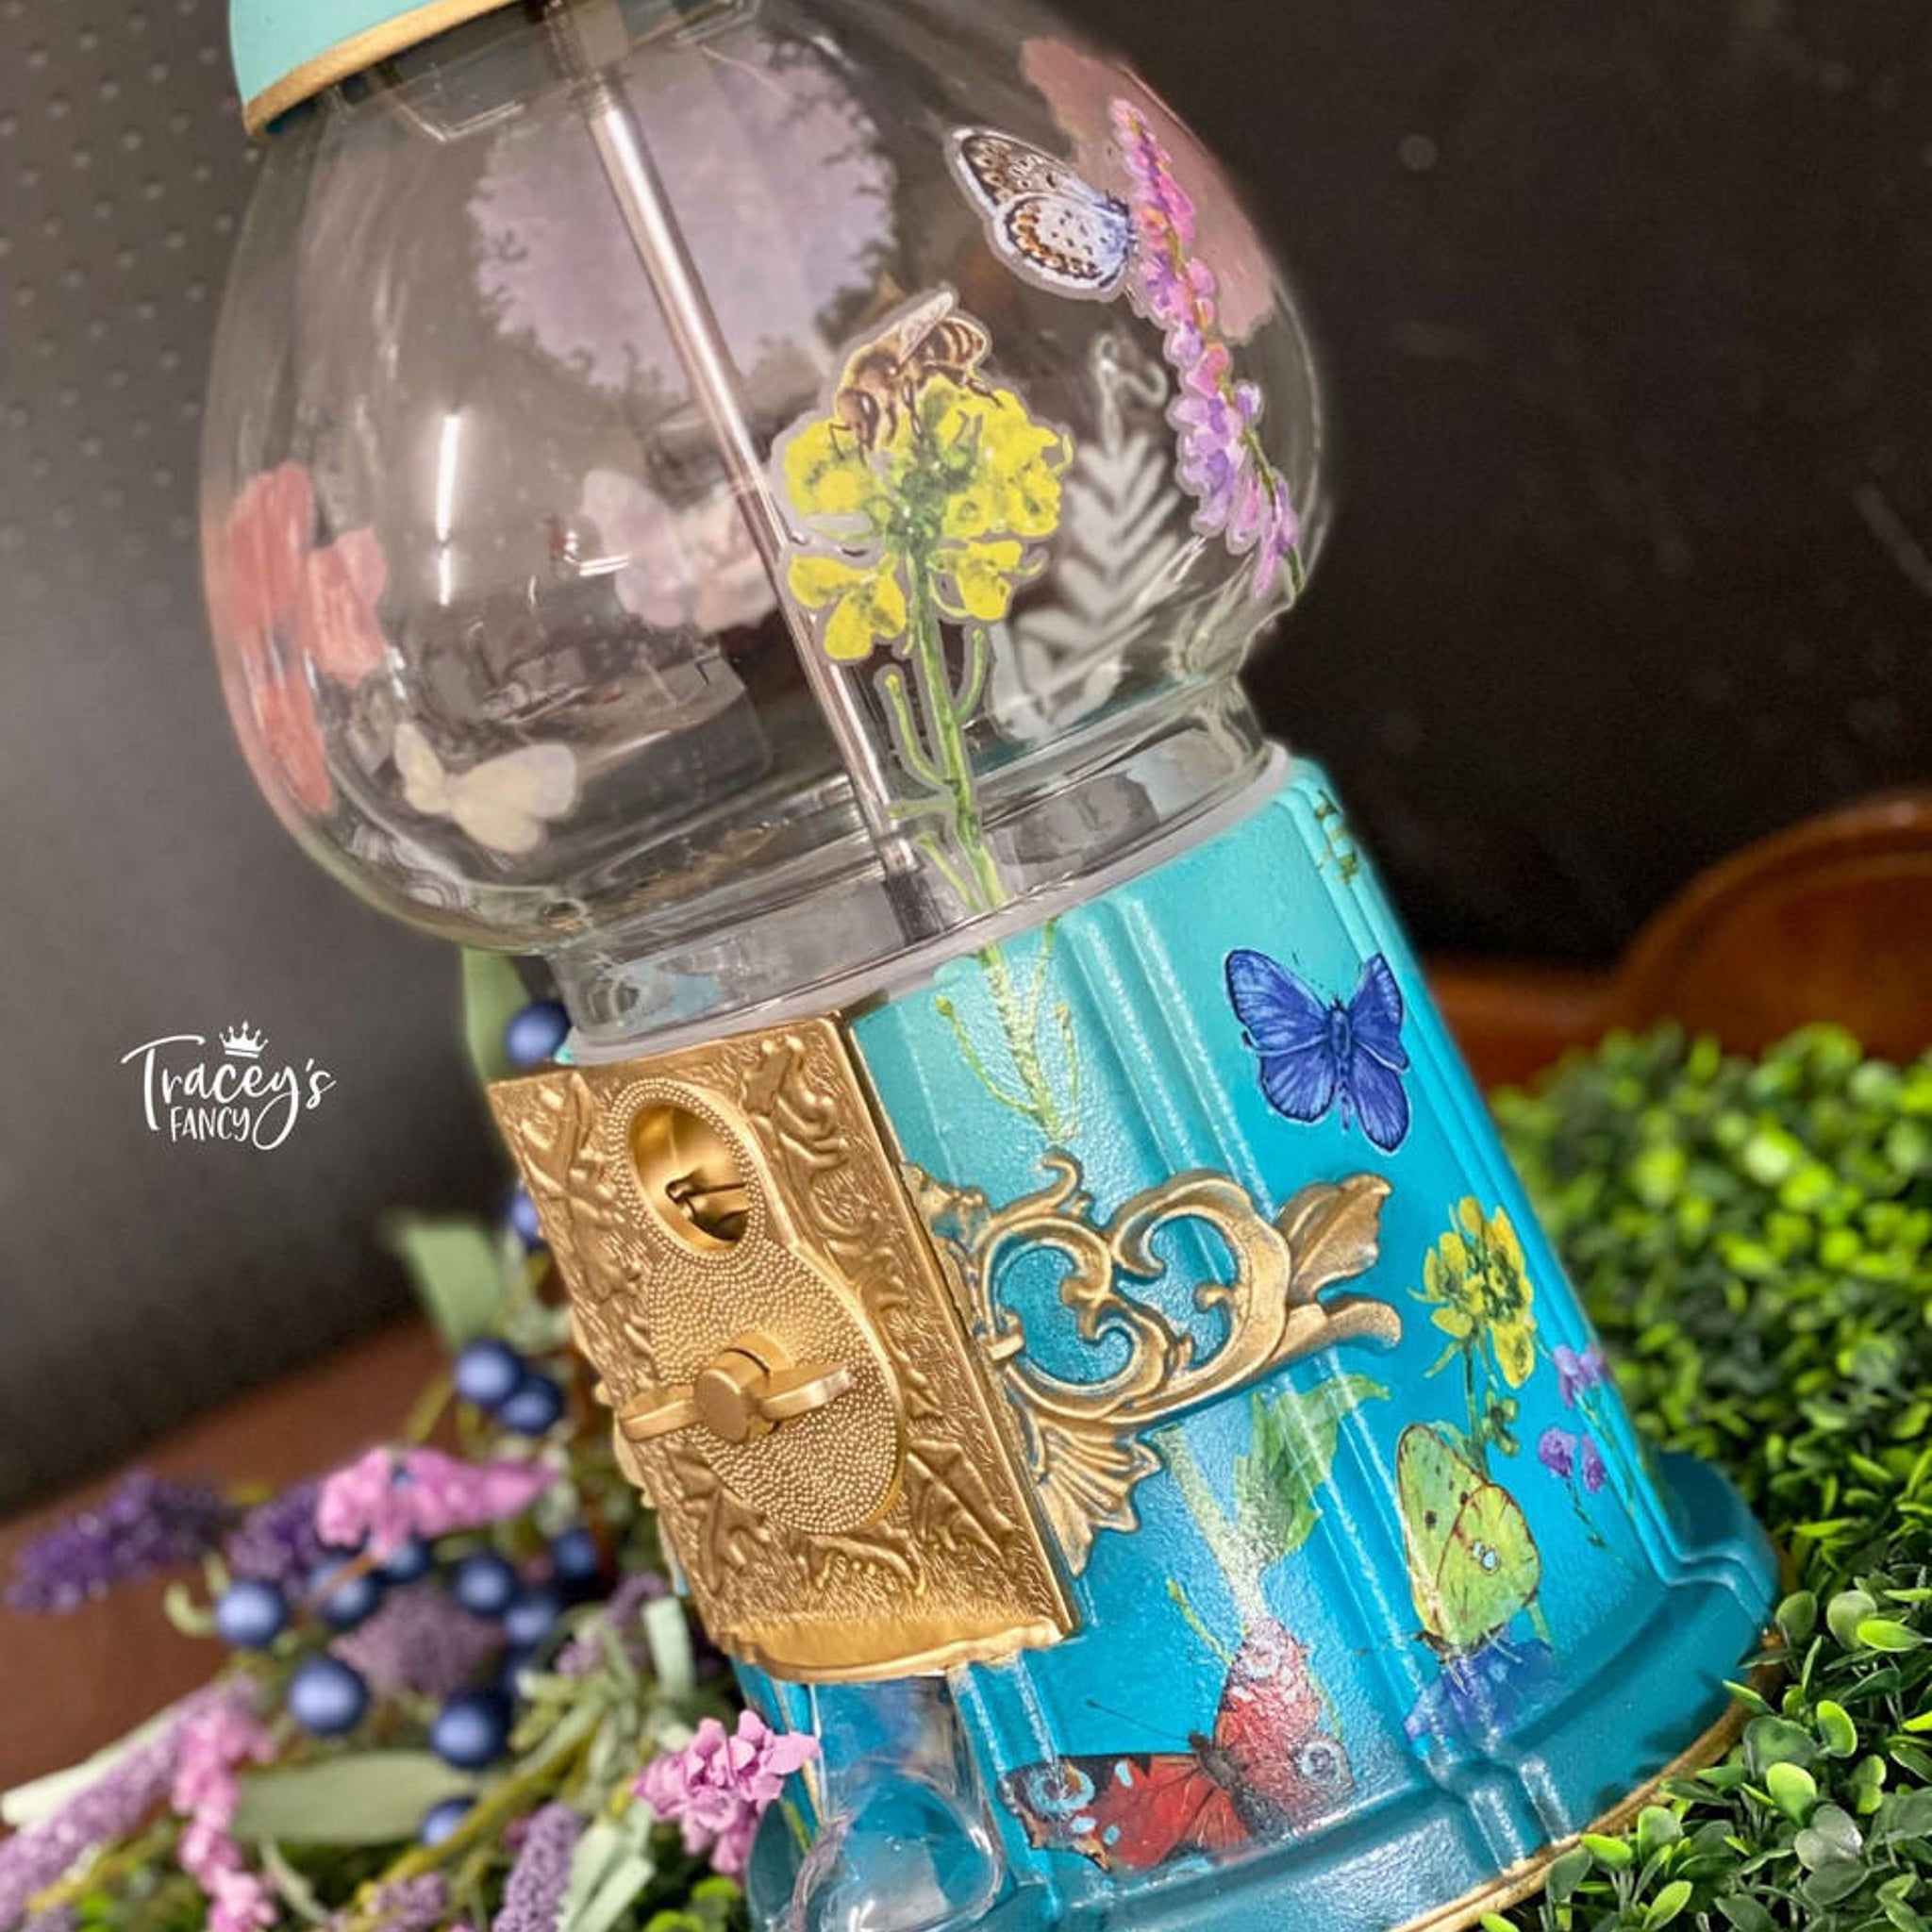 A gumball machine refurbished by Tracey's Fancy is painted teal blue and features the Wildflowers & Butterflies transfer on it.